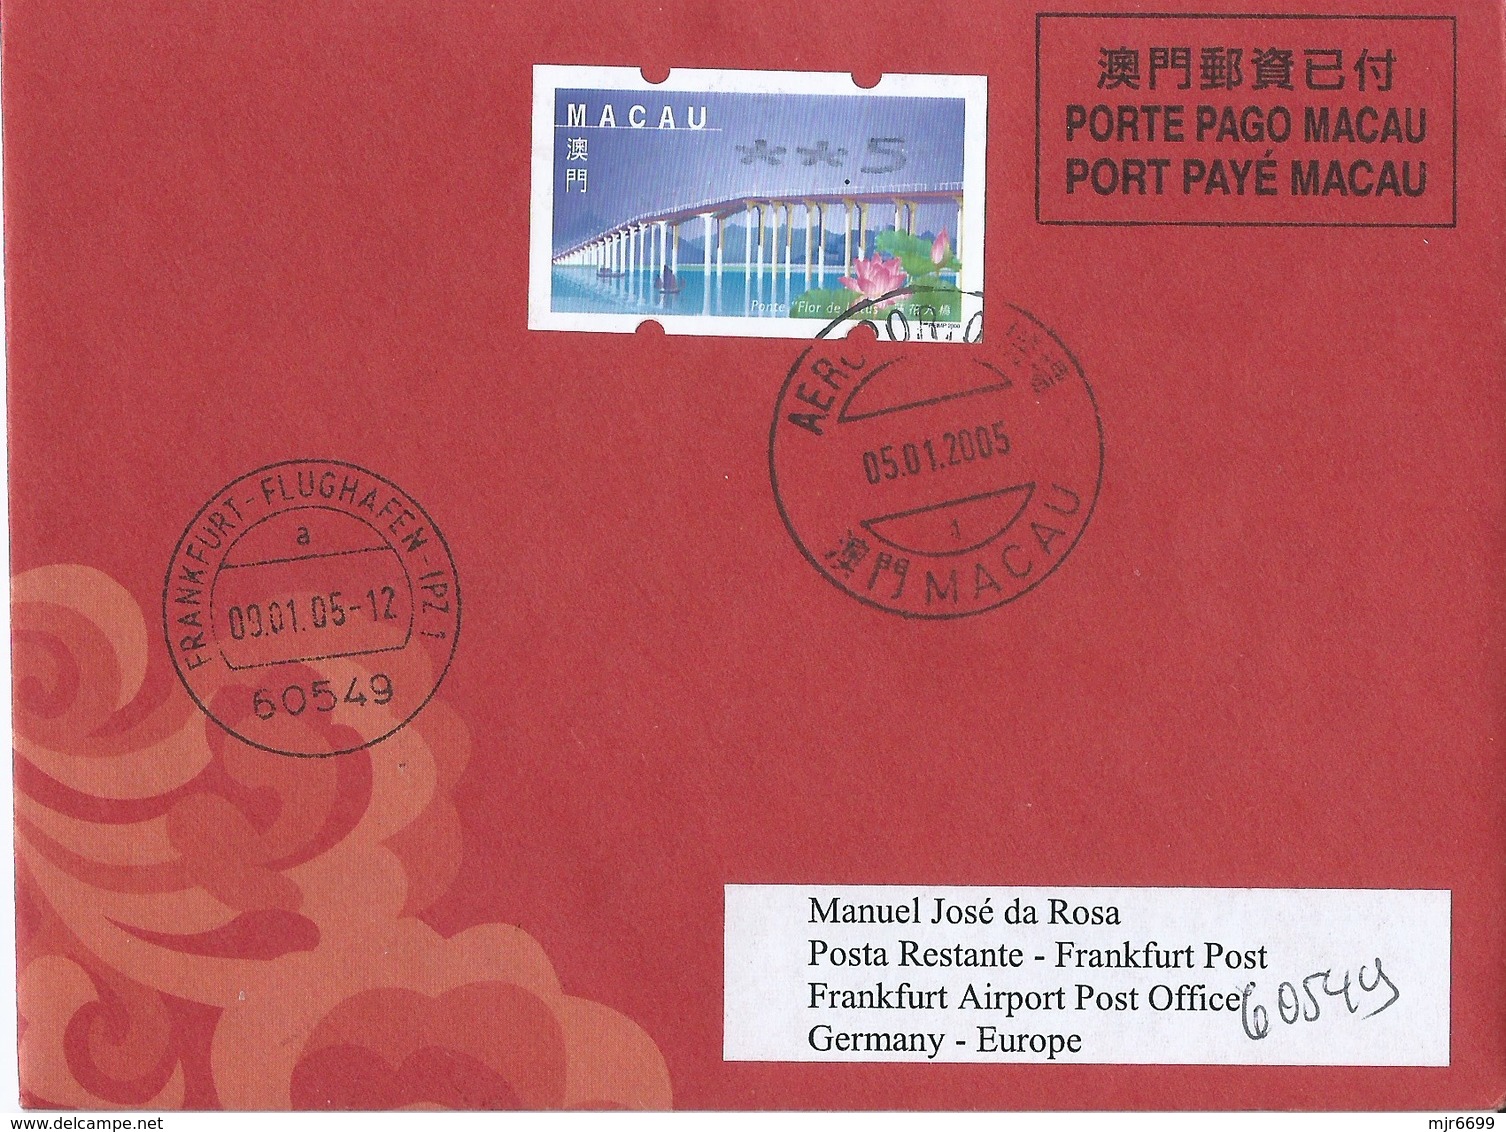 MACAU 2005 LUNAR NEW YEAR OF THE COCK GREETING CARD & POSTAGE PAID COVER 1ST DAY USAGE TO GERMANY - Postwaardestukken